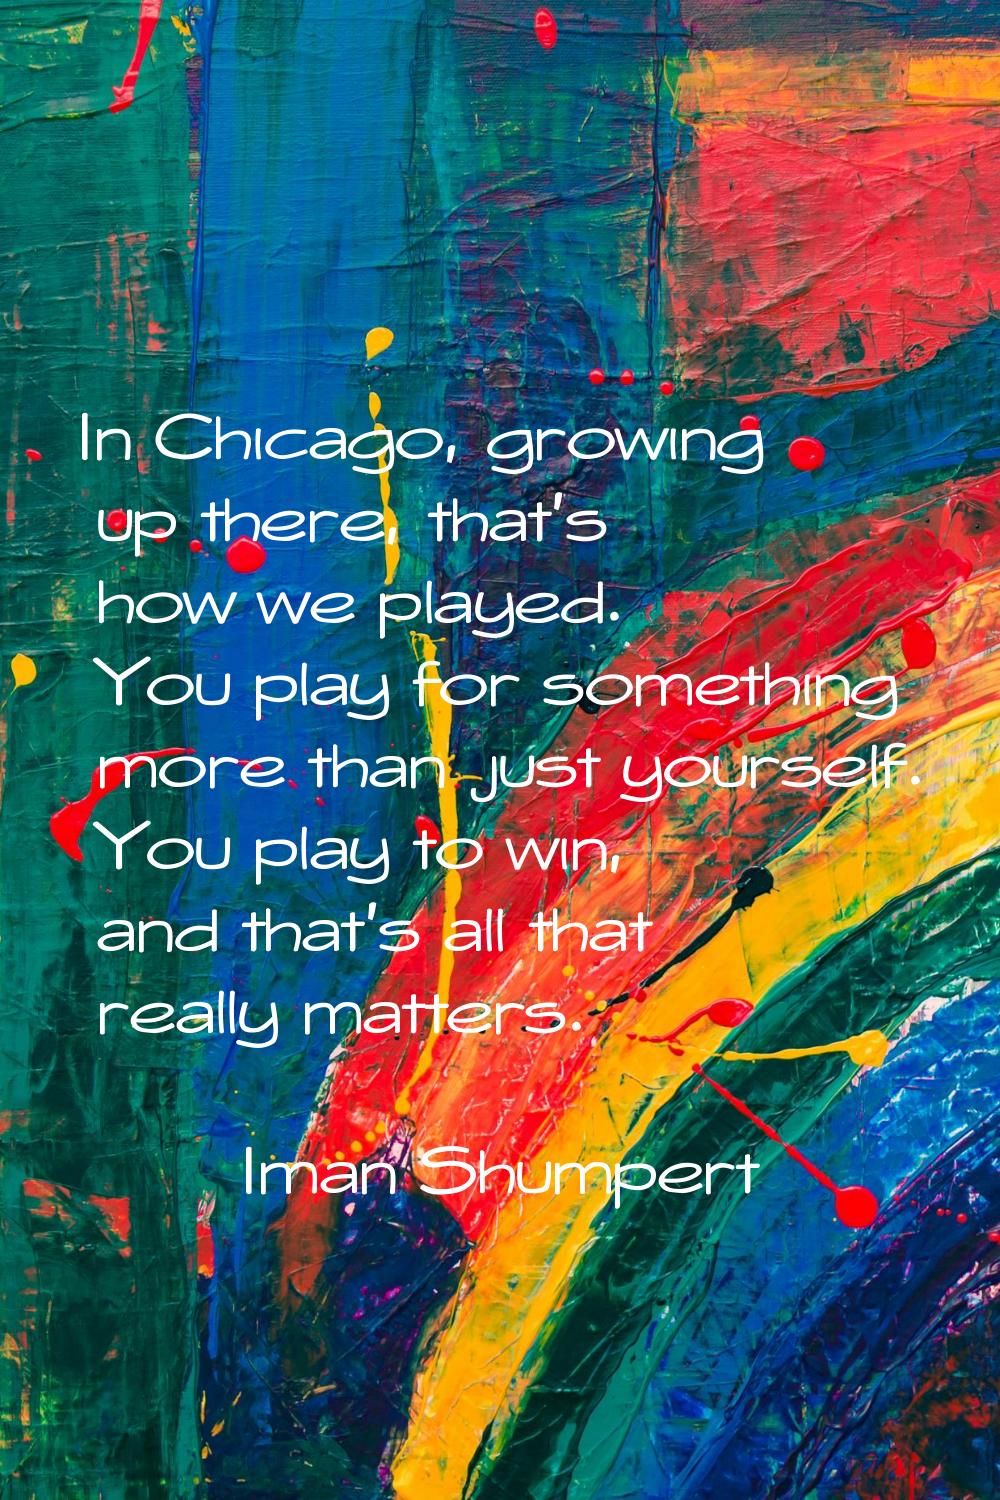 In Chicago, growing up there, that's how we played. You play for something more than just yourself.